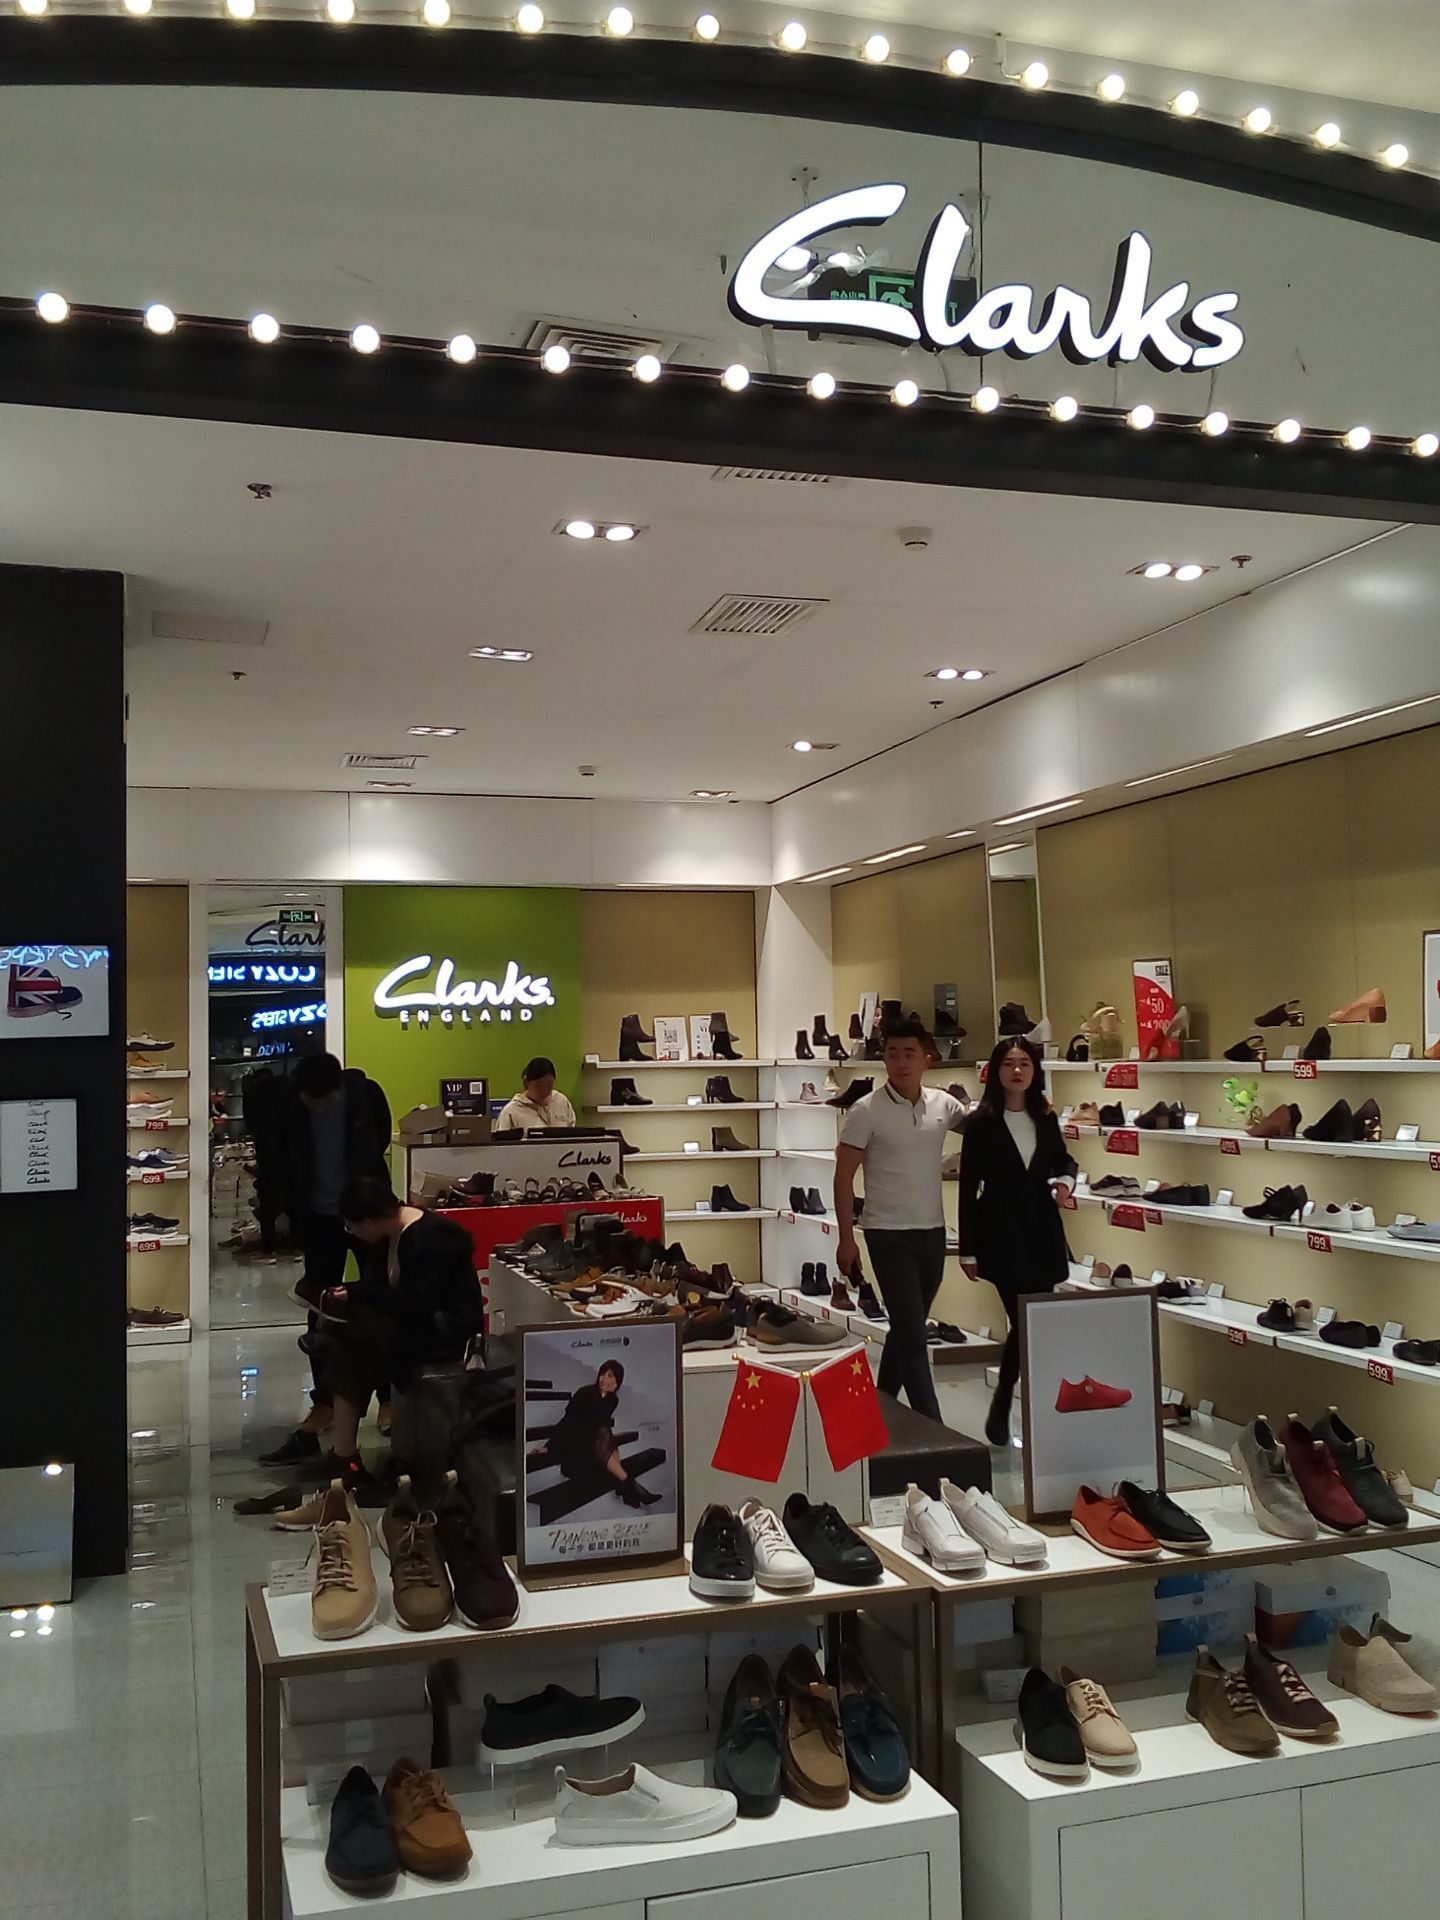 clarks(上海协信星光广场or)